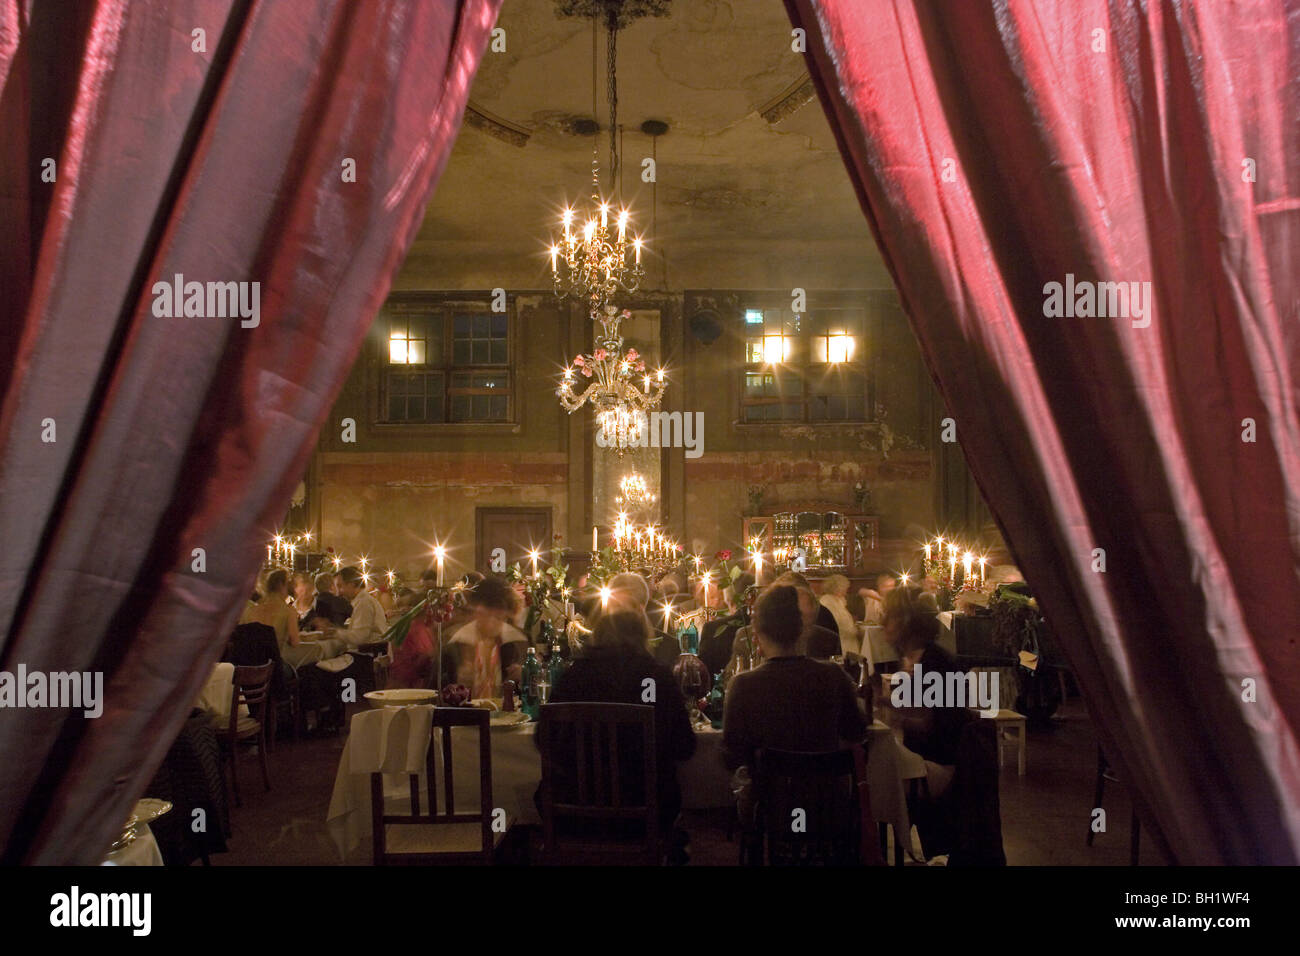 Claerchens Ballhaus, Berlin Mitte, private candlelight party with opera singers in costume, Berlin, Germany Stock Photo